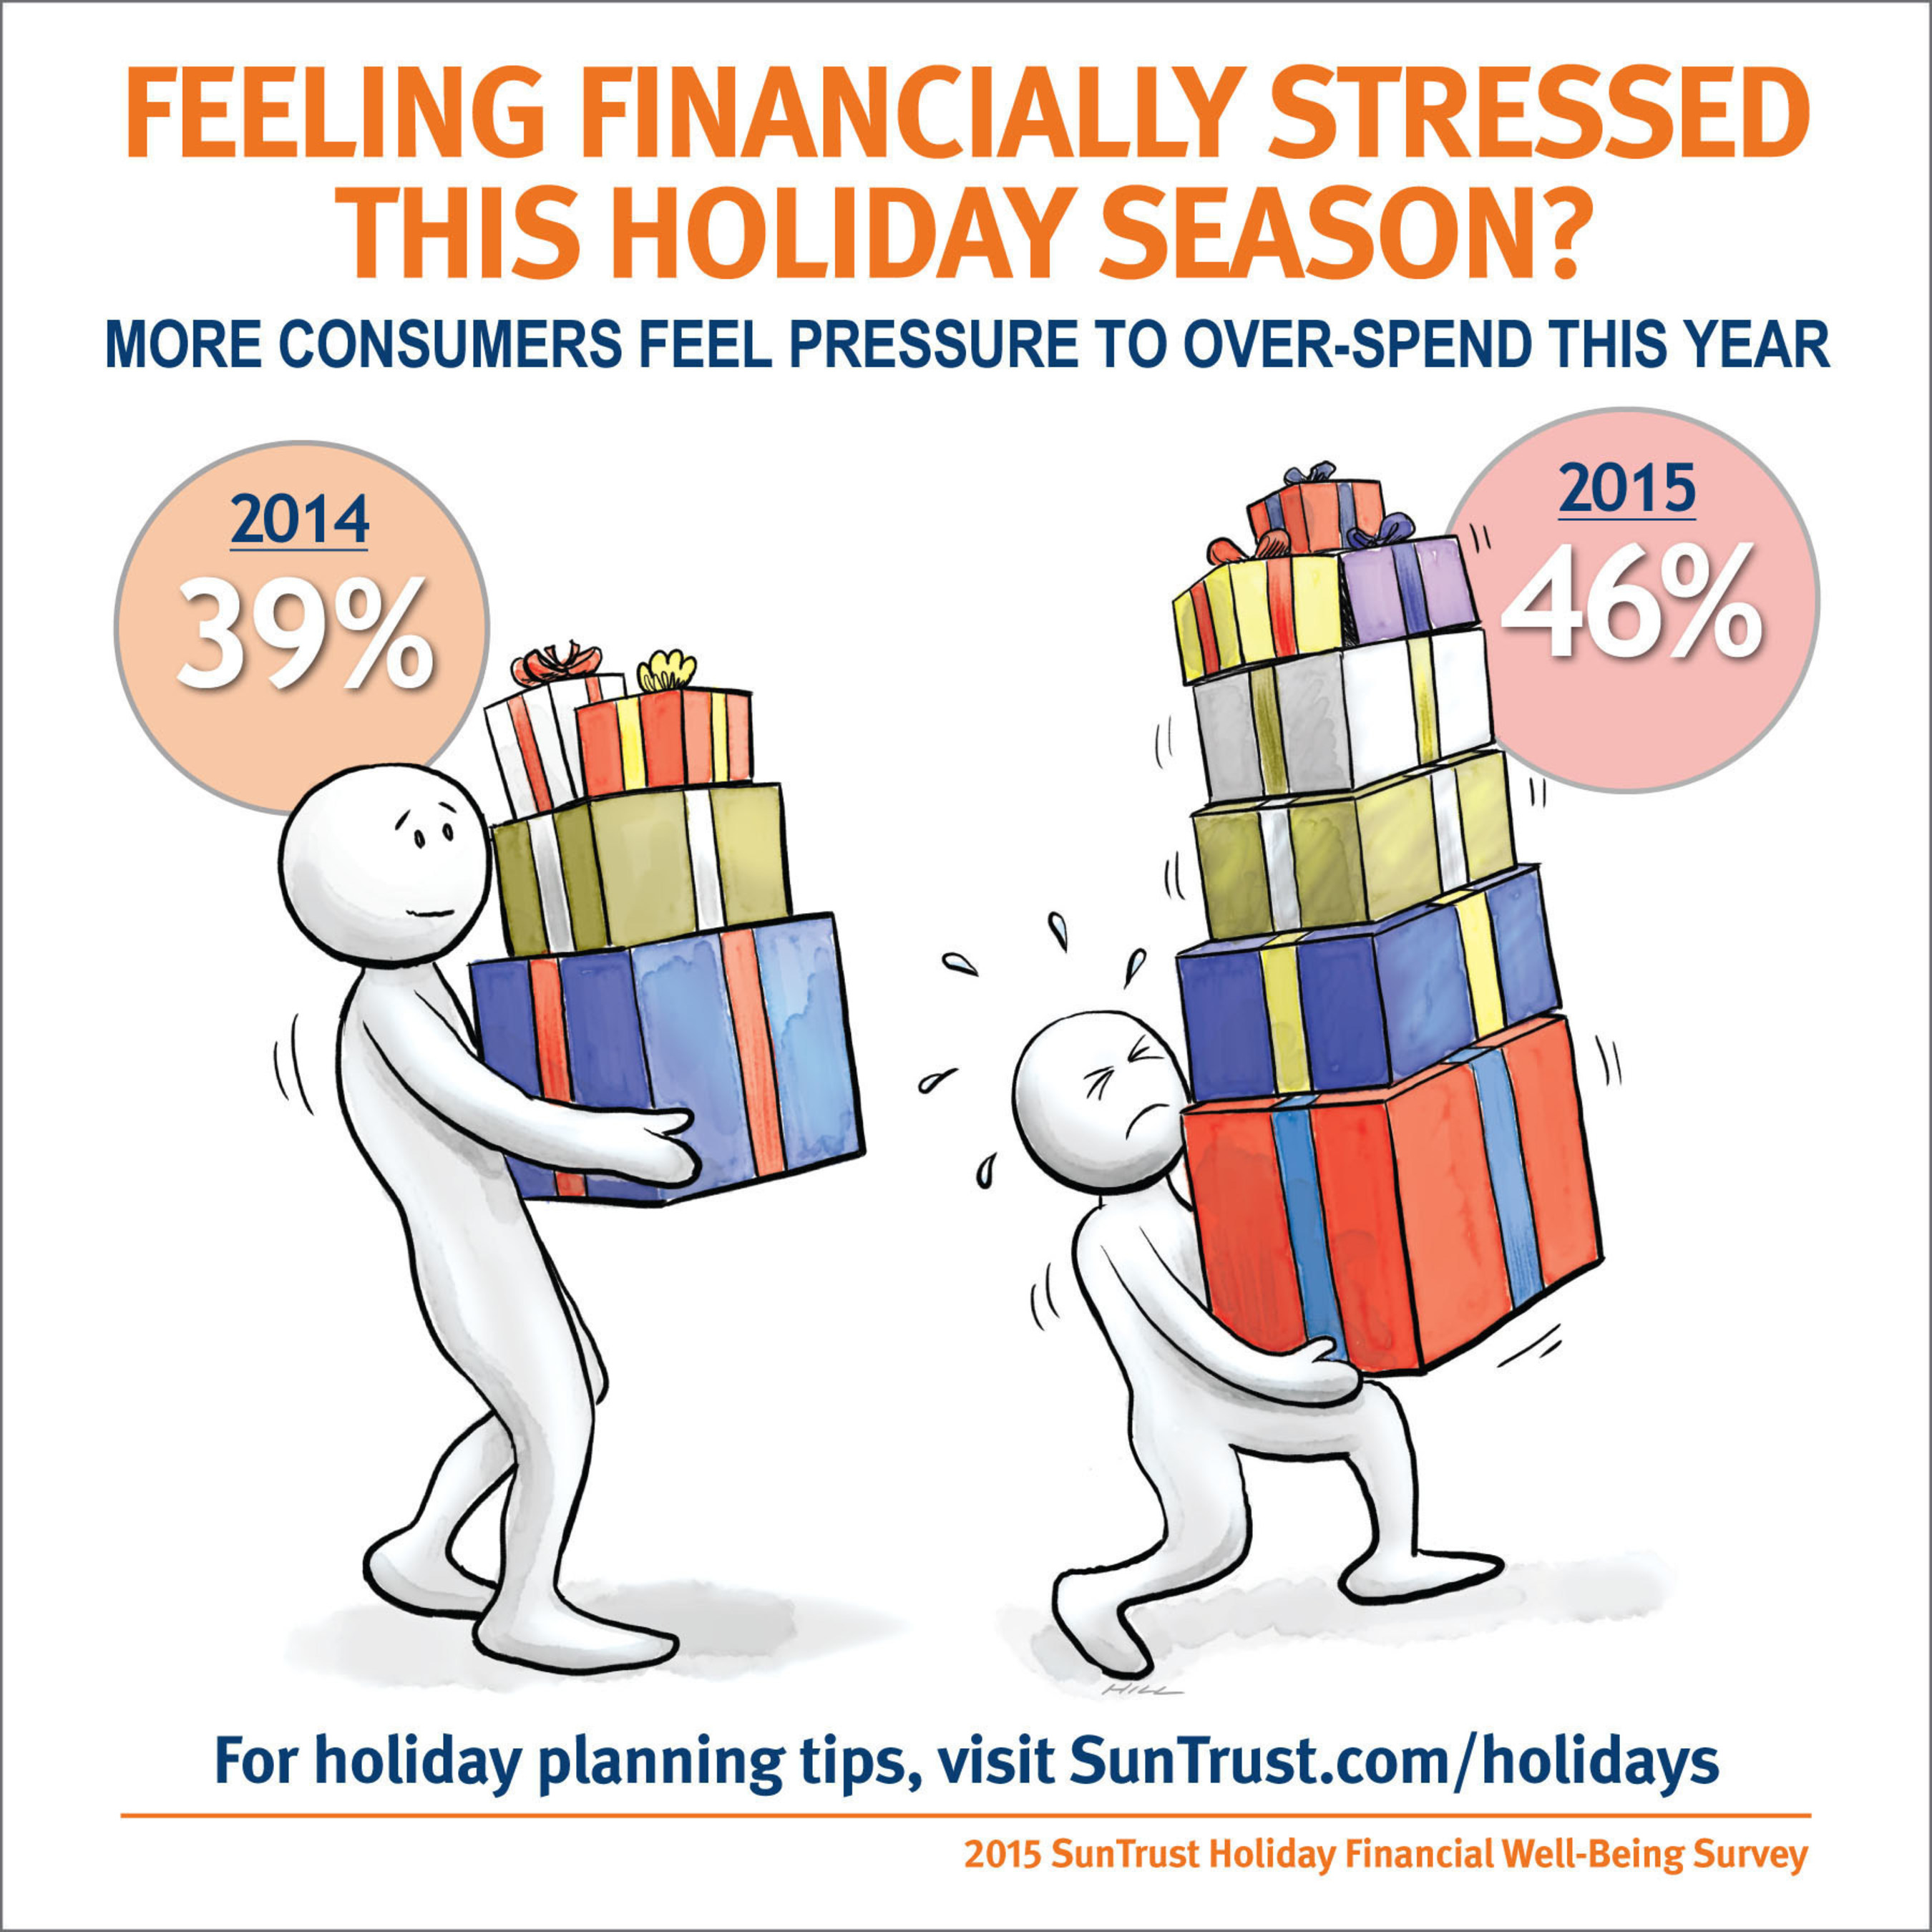 SunTrust's 2015 holiday financial well-being survey finds more consumers feel pressure to over-spend this year.